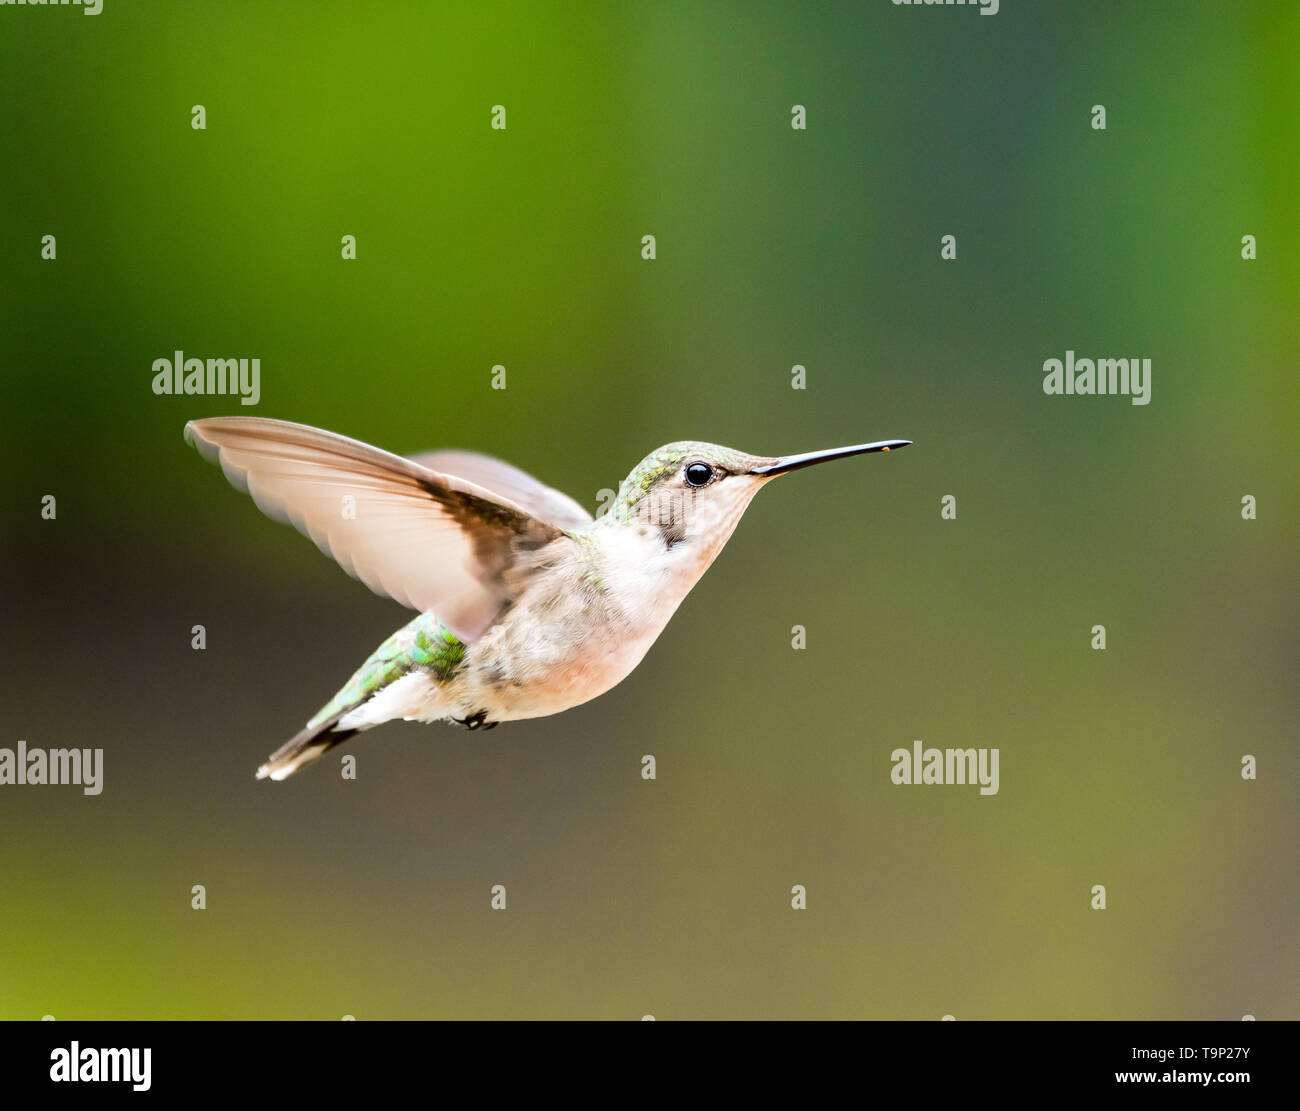 Female Ruby-Throated Hummingbird flying in front of a dark green background. Stock Photo